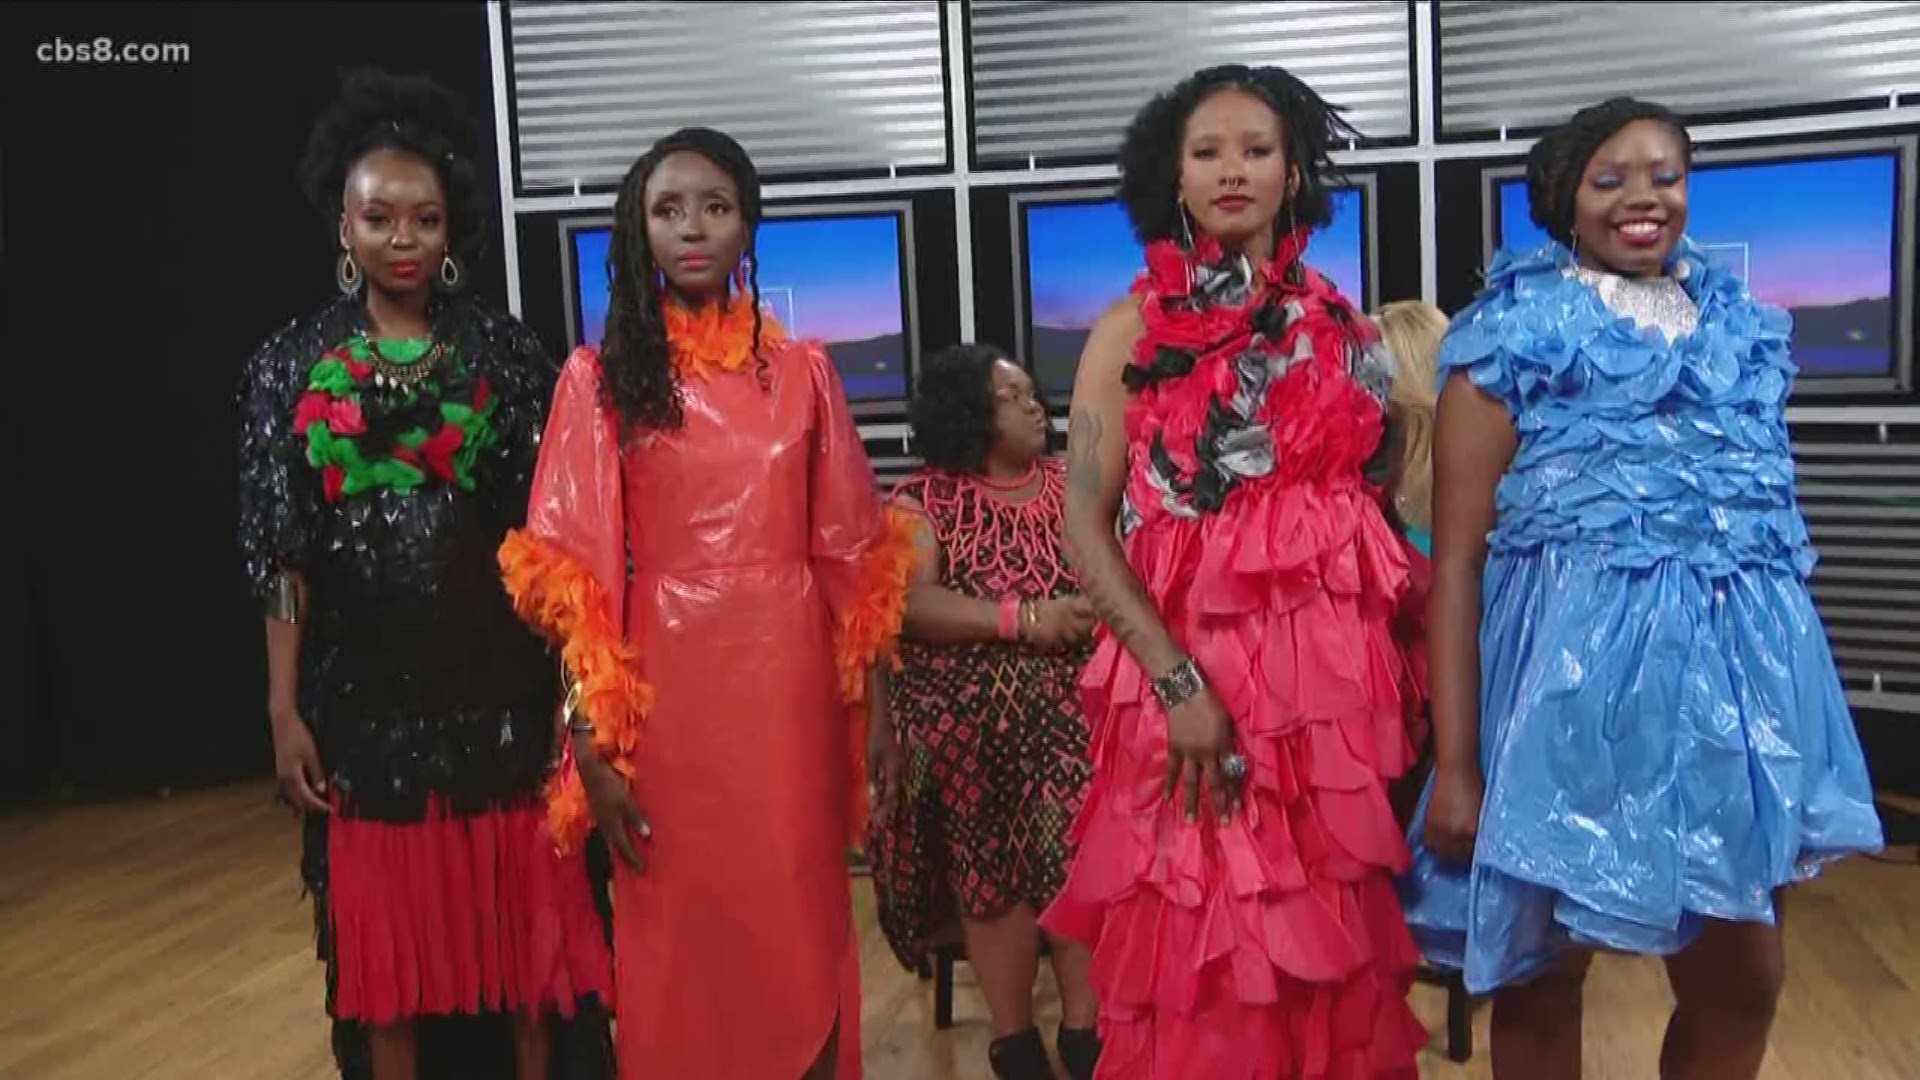 Sharon D. Ibe stopped by the studio to show off her one-of-a-kind trash bag creations.